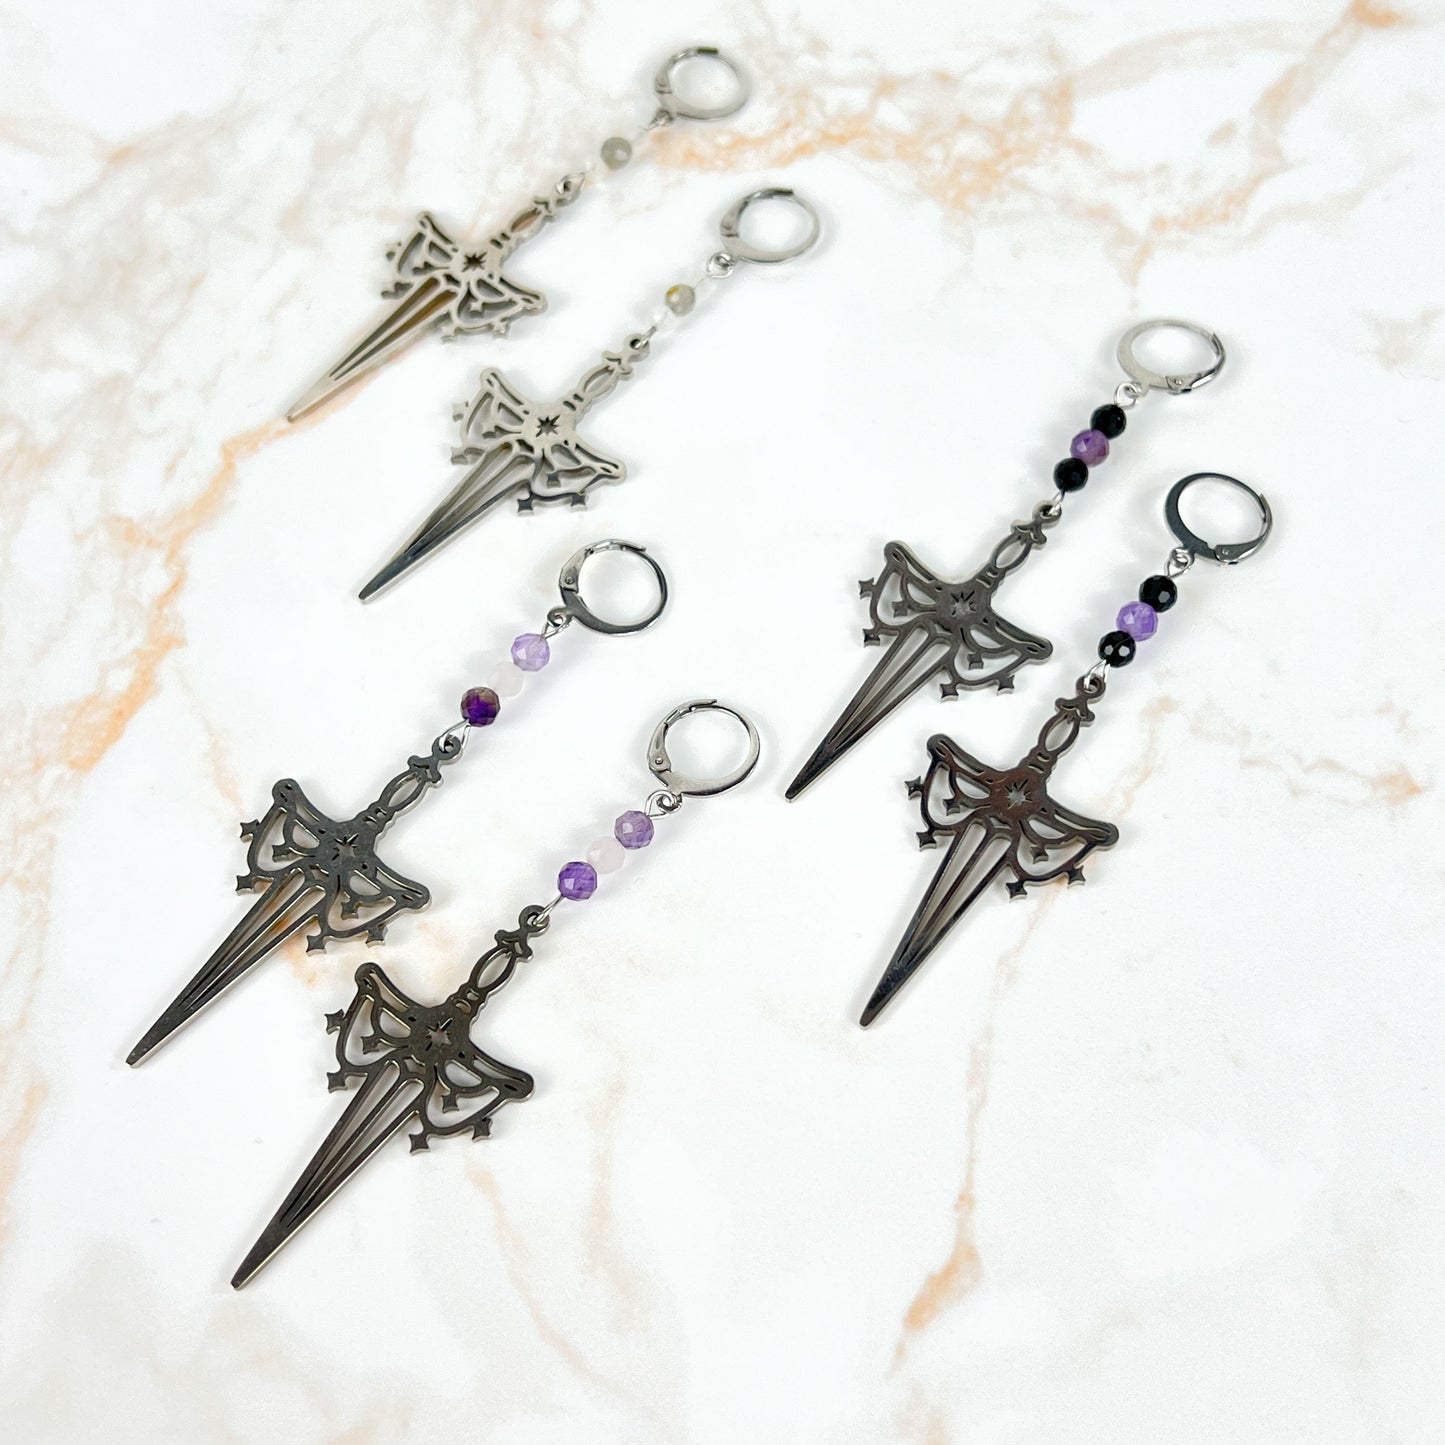 Gemstone sword earrings, stainless steel and faceted beads